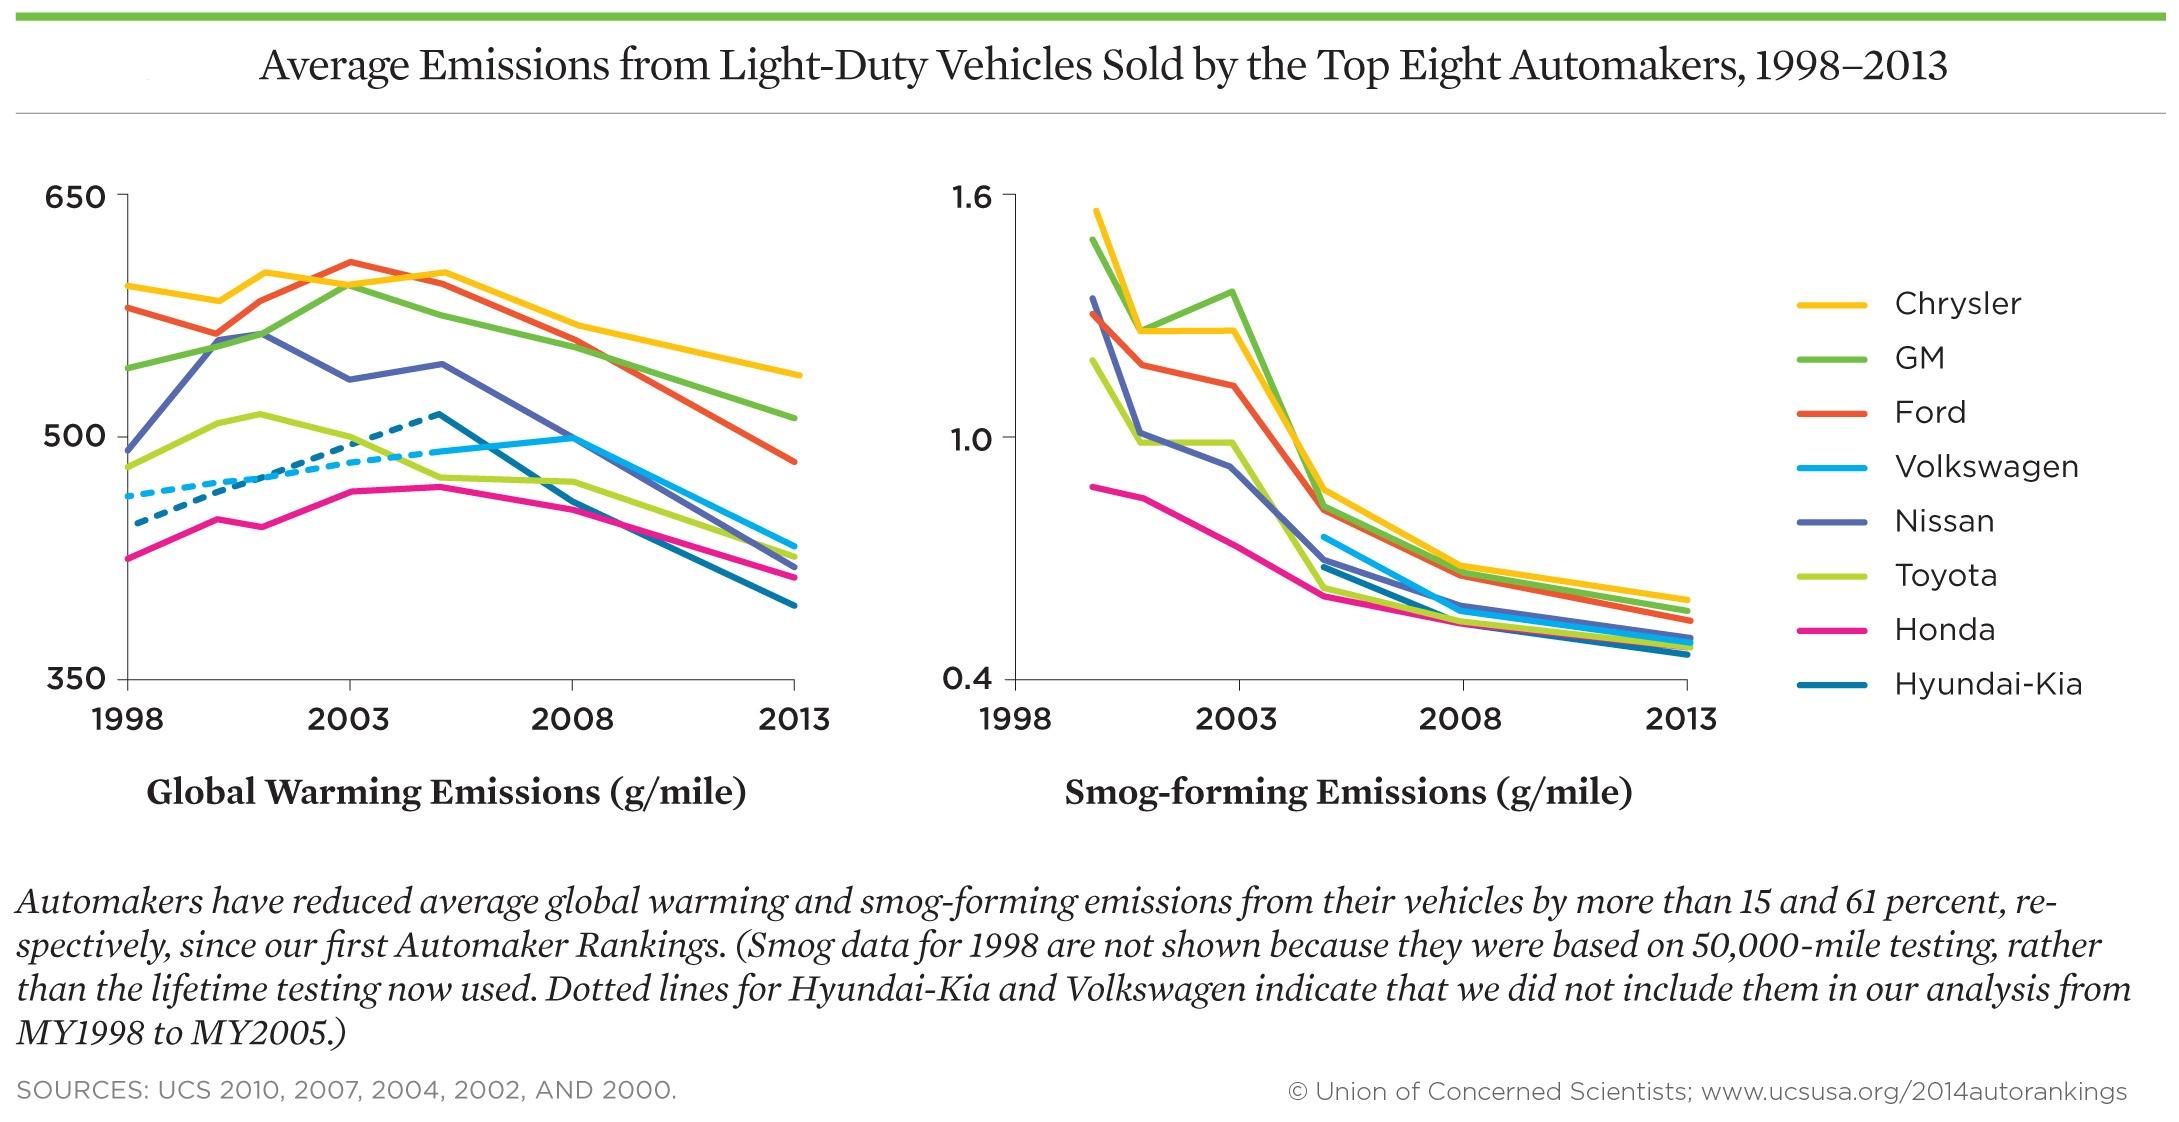 http://murrayhyundai2.murrayautogroupprod.com/wp-content/uploads/sites/32/2019/03/average-emissions-from-light-duty-vehicles-1998-2013-via-the-union-of-concerned-scientists_100468249_h.jpg